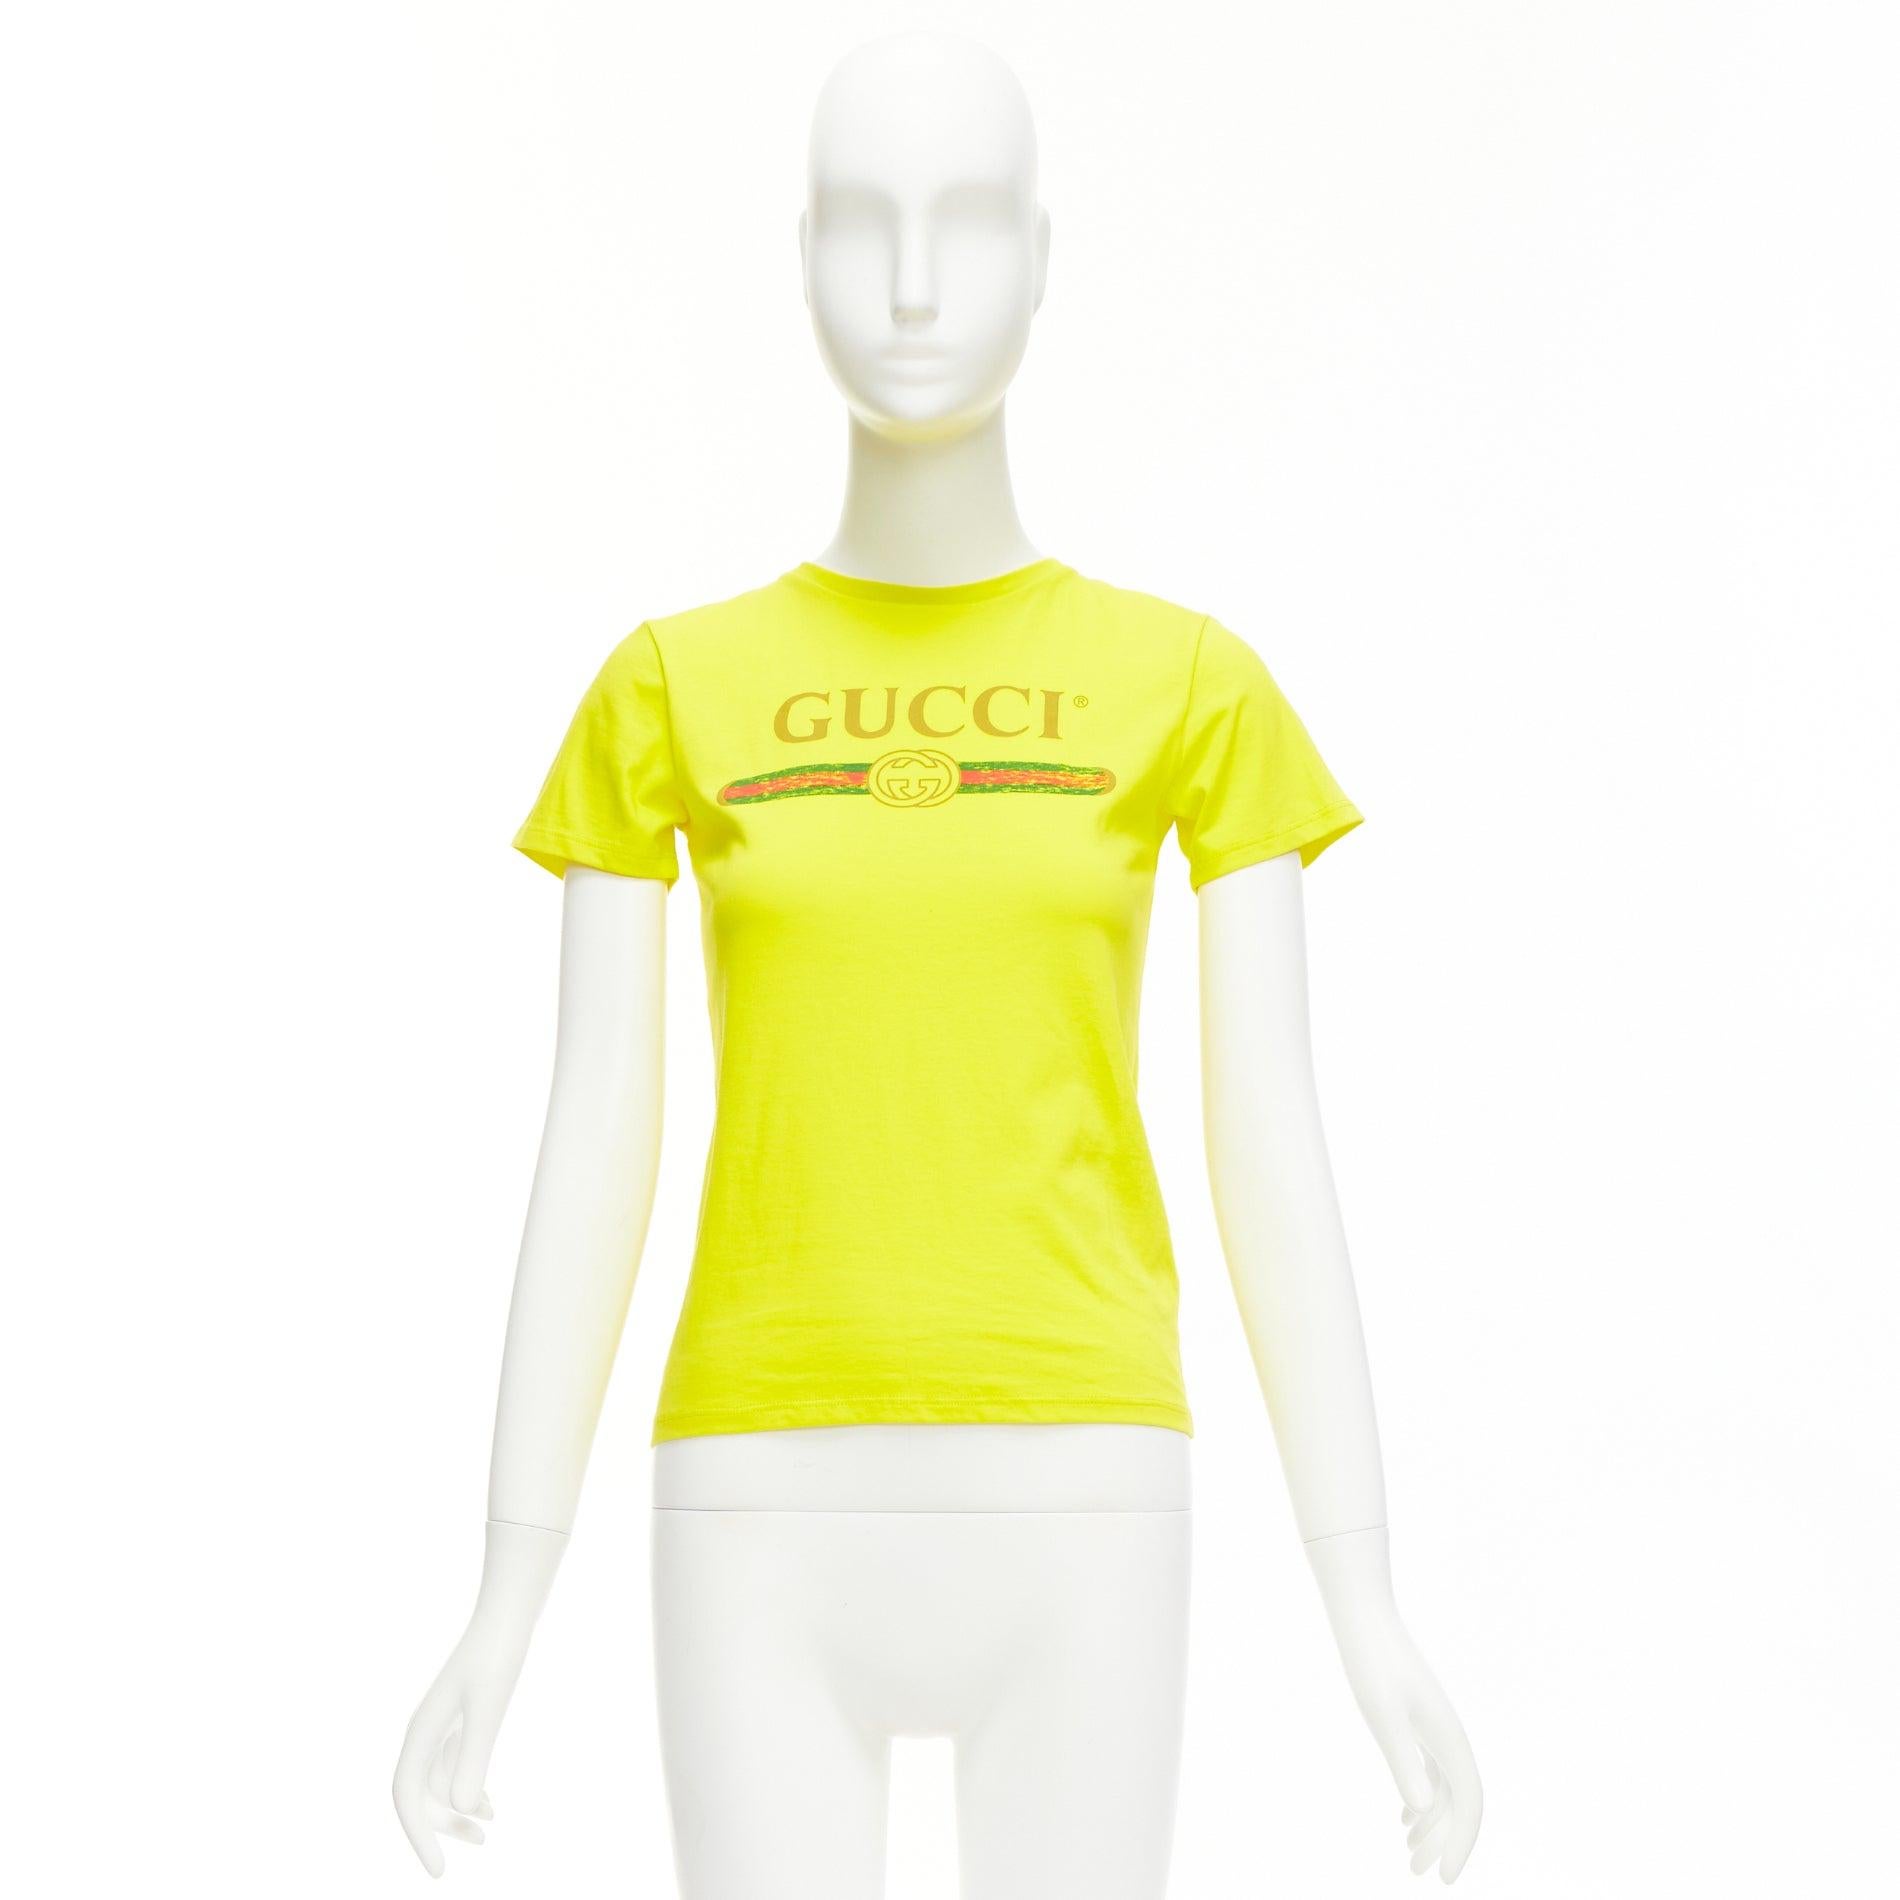 GUCCI KIDS bright yellow vintage logo crew neck tshirt 10Y XS For Sale 5